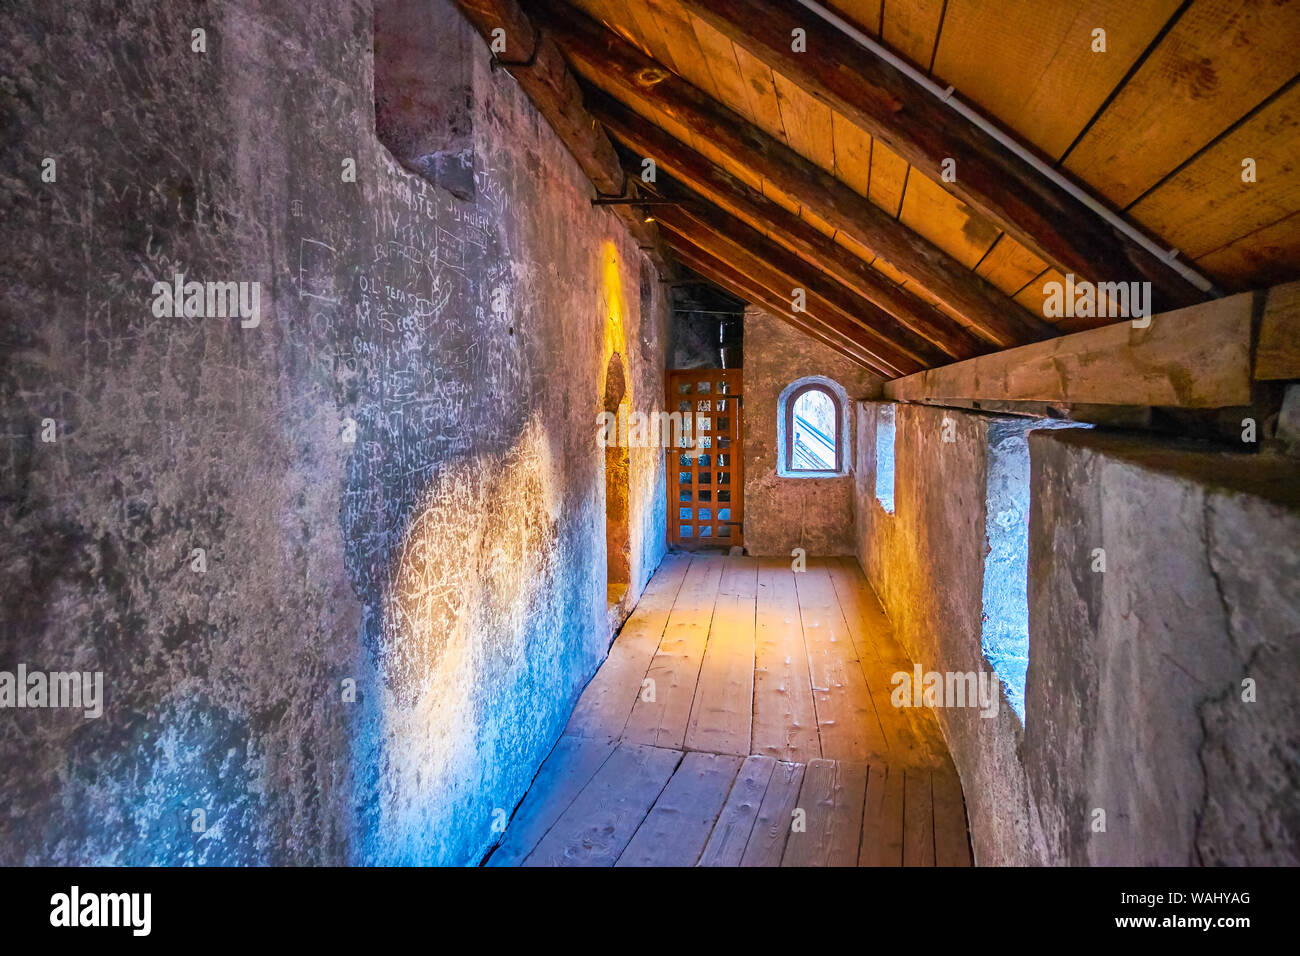 SALZBURG, AUSTRIA - FEBRUARY 27, 2019: The covered corridor of medieval catacombs with low windows in St Peters cemetery, on February 27 in Salzburg Stock Photo